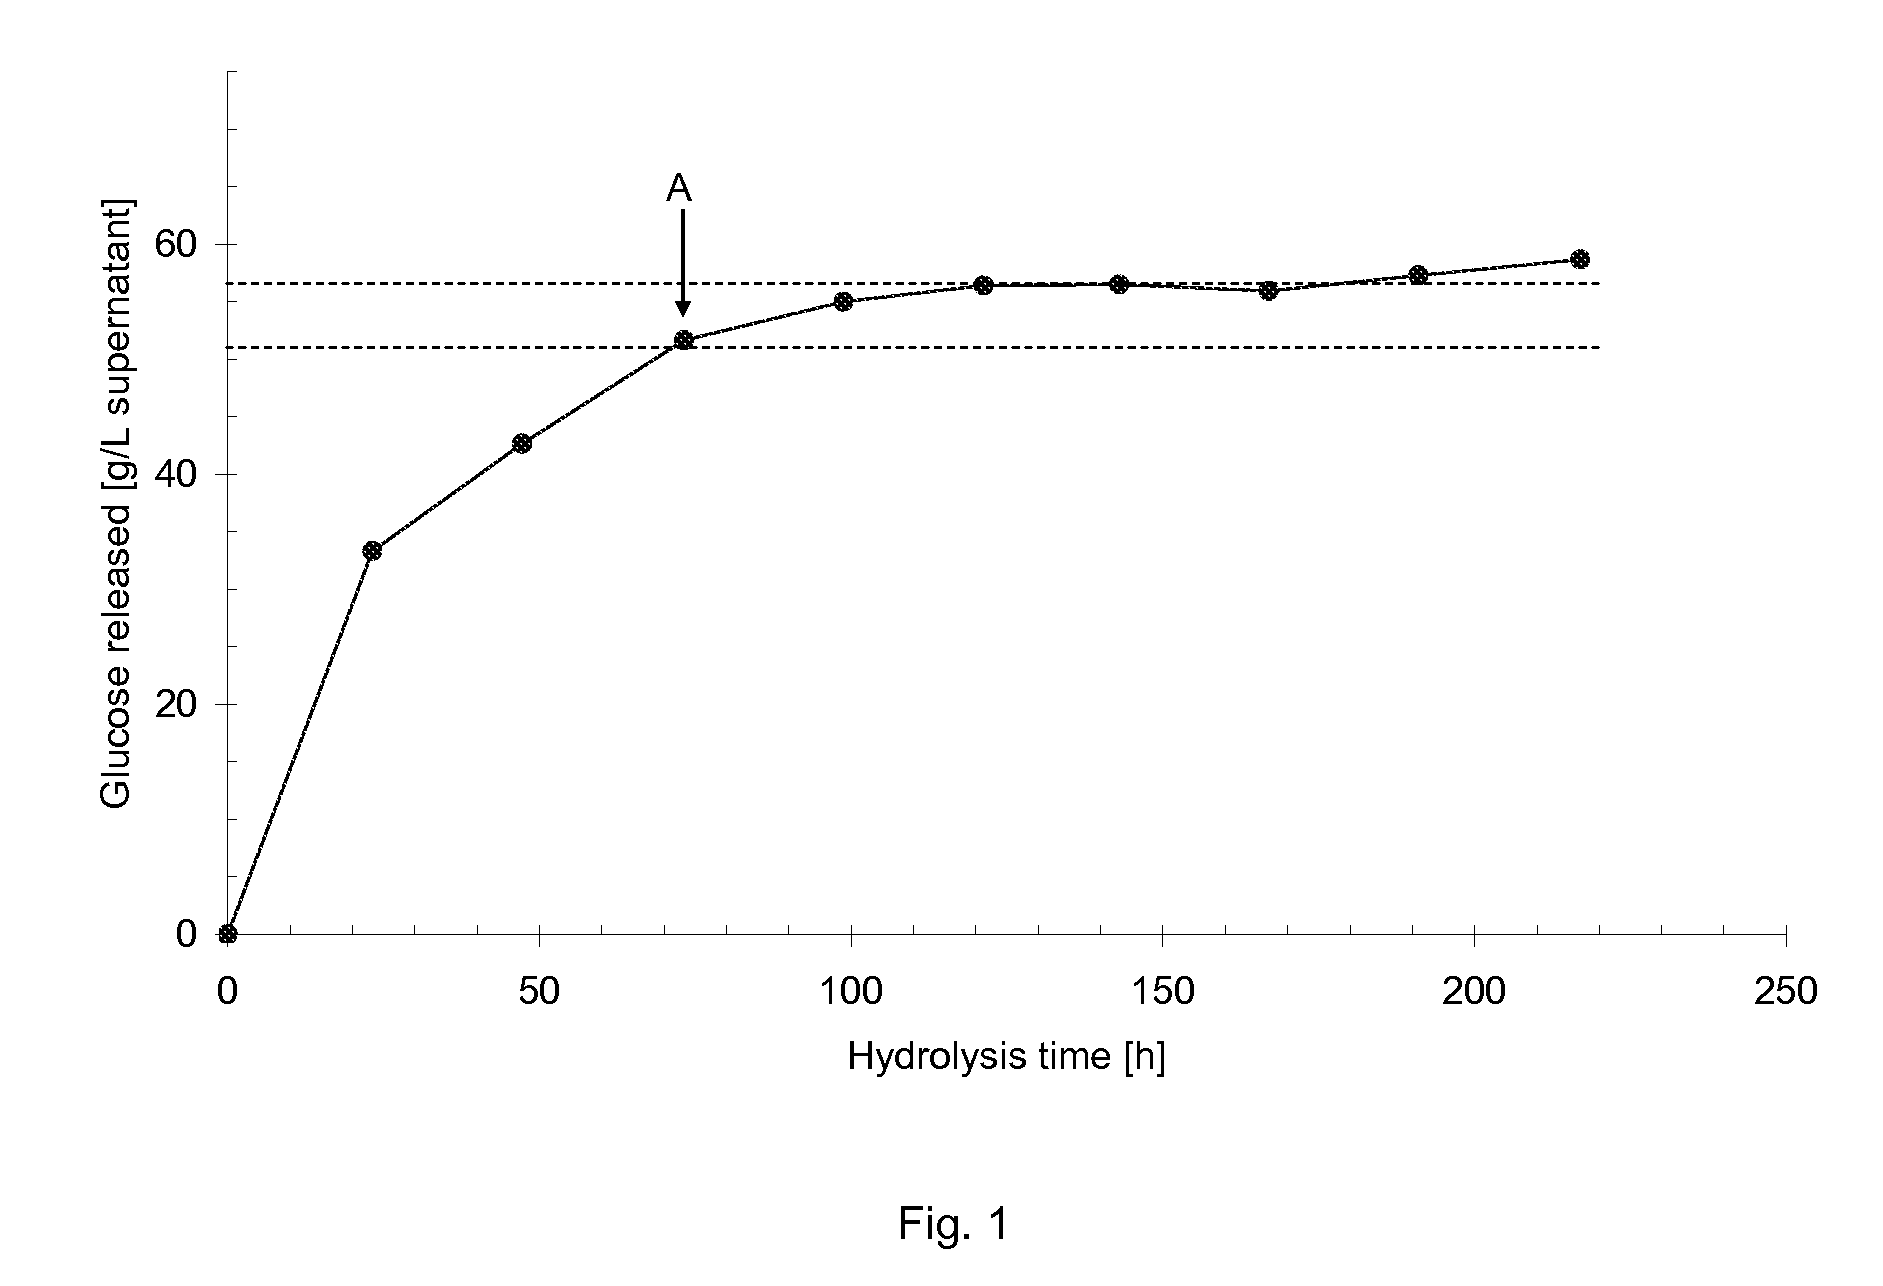 Process for enzymatic hydrolysis of lignocellulosic materila and fermentation of sugars